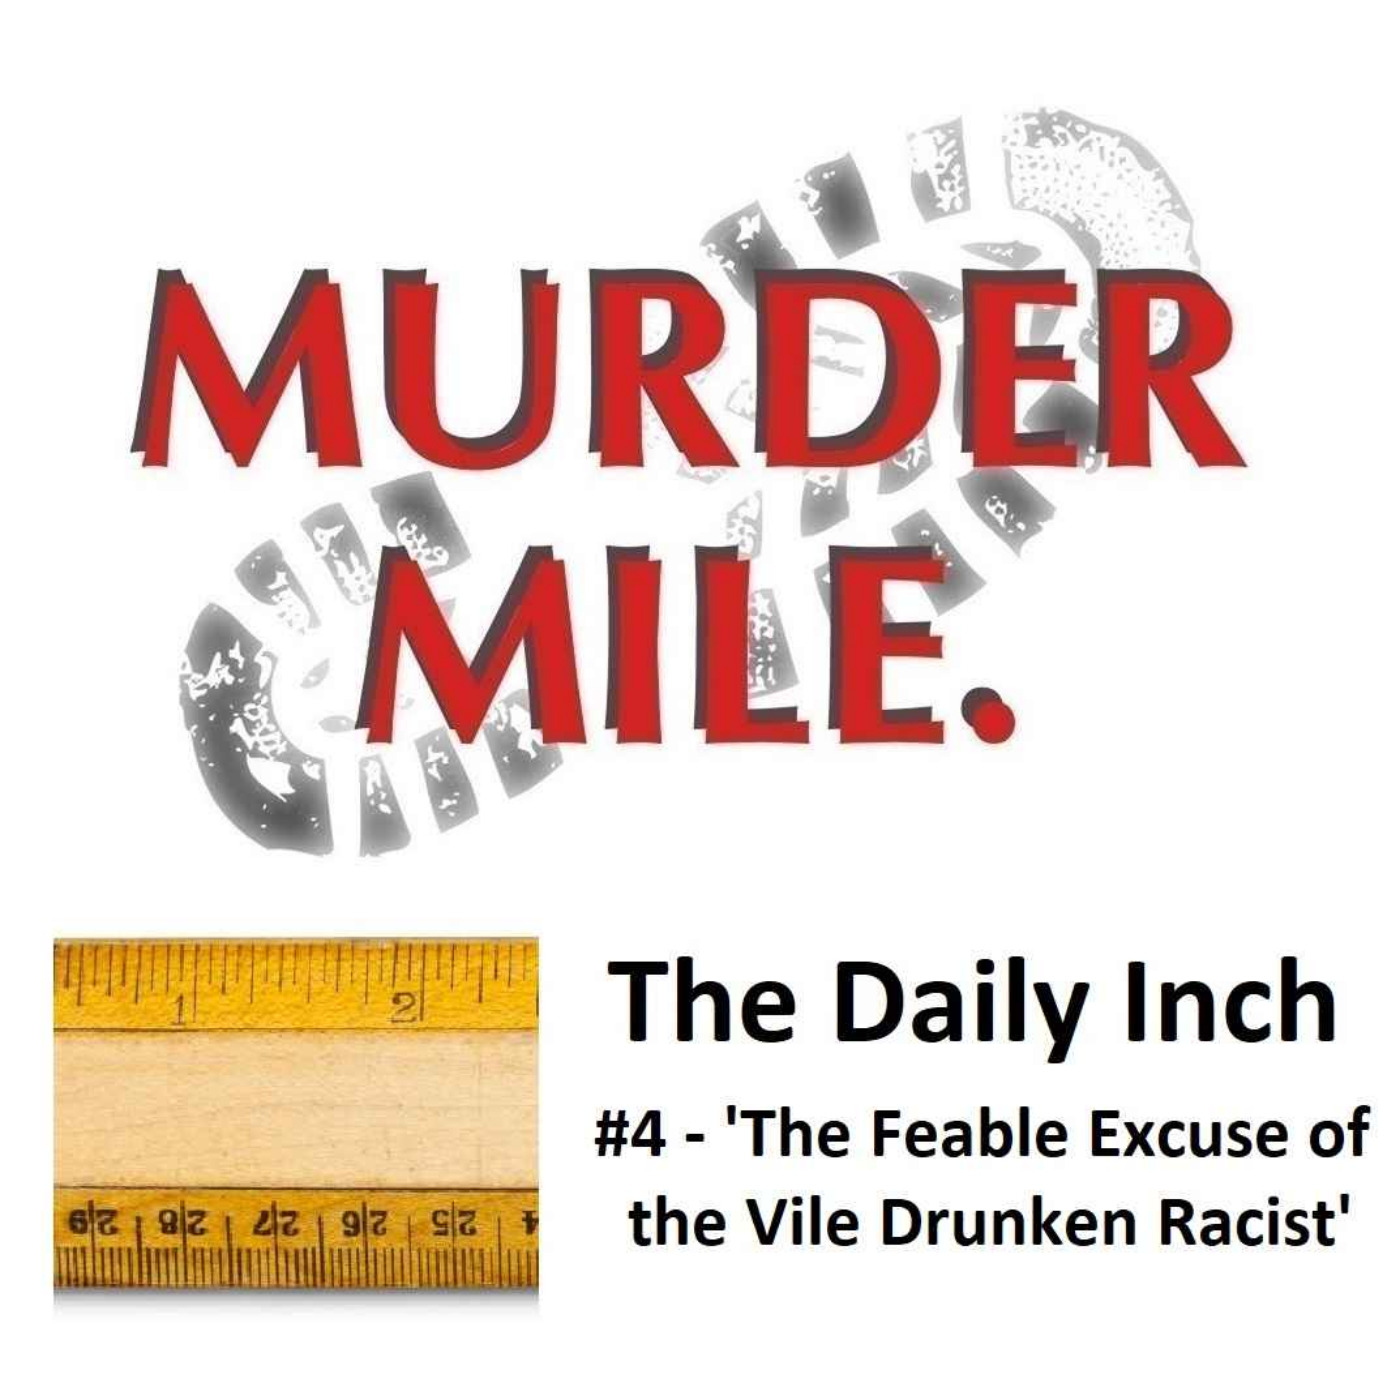 The Daily Inch #4 - 'The Feable Excuse of the Vile Drunken Racist'